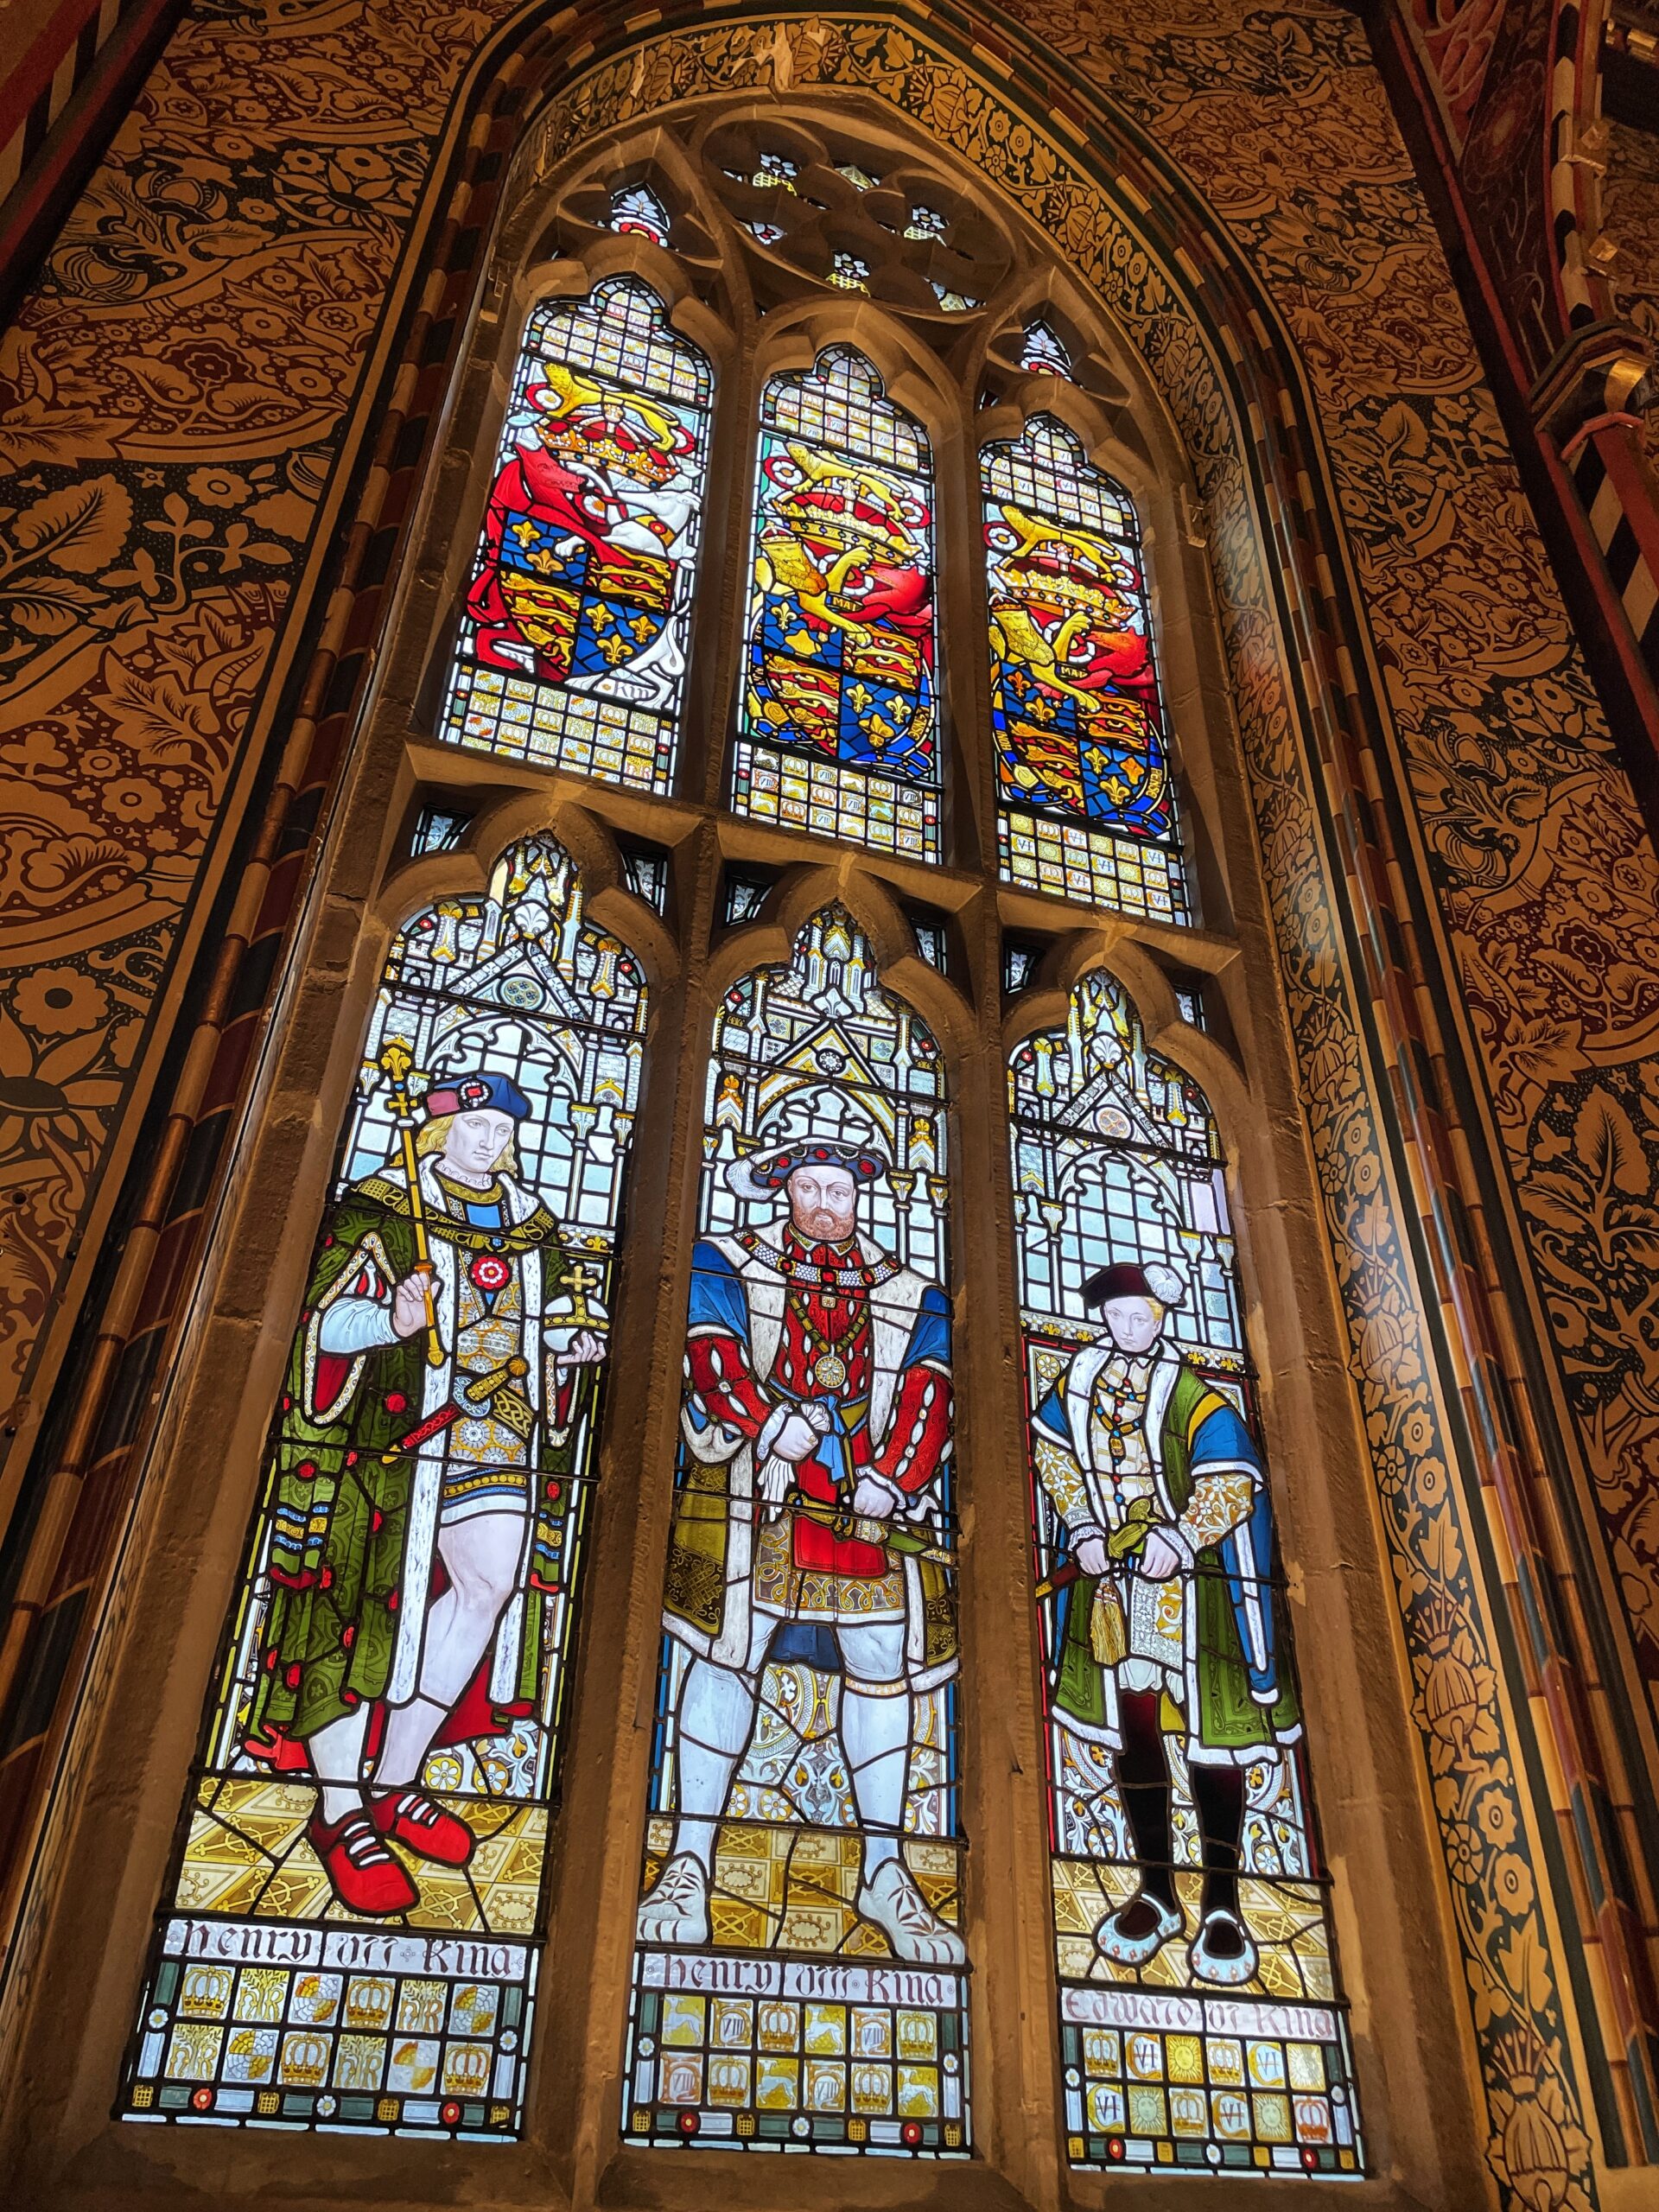 One of many beautiful stained glass windows inside Rochdale Town Hall